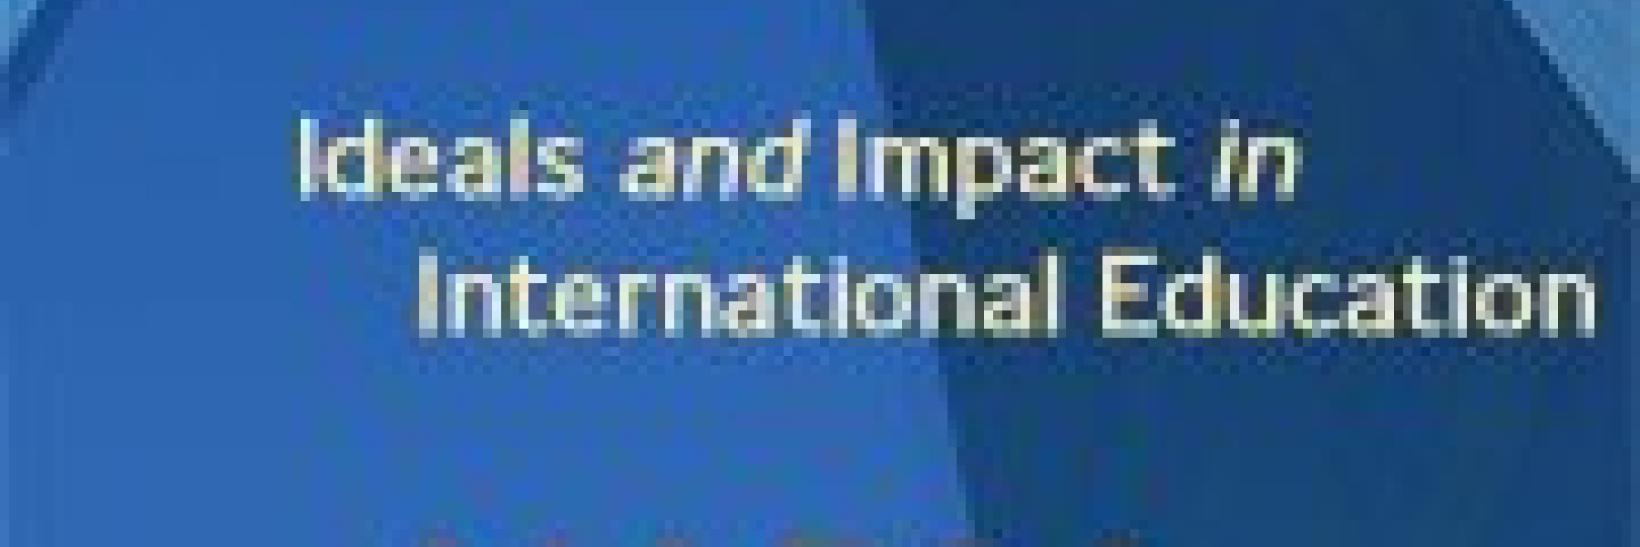 Ideals and Impact in International Education: NAFSA 2013 Annual Conference & Expo